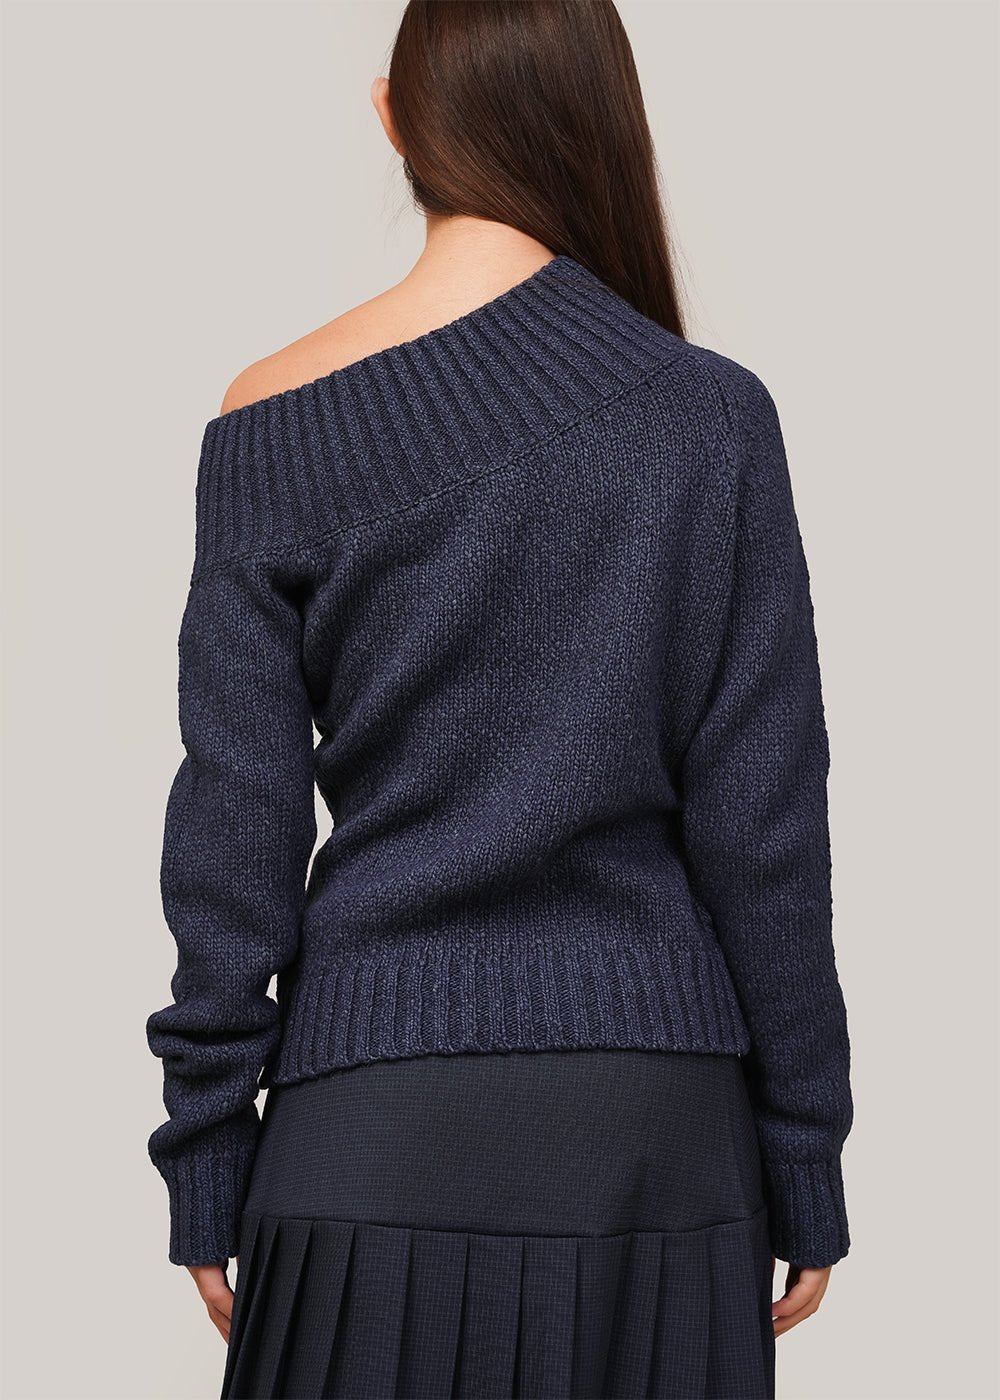 Paloma Wool Navy Marti Sweater - New Classics Studios Sustainable Ethical Fashion Canada